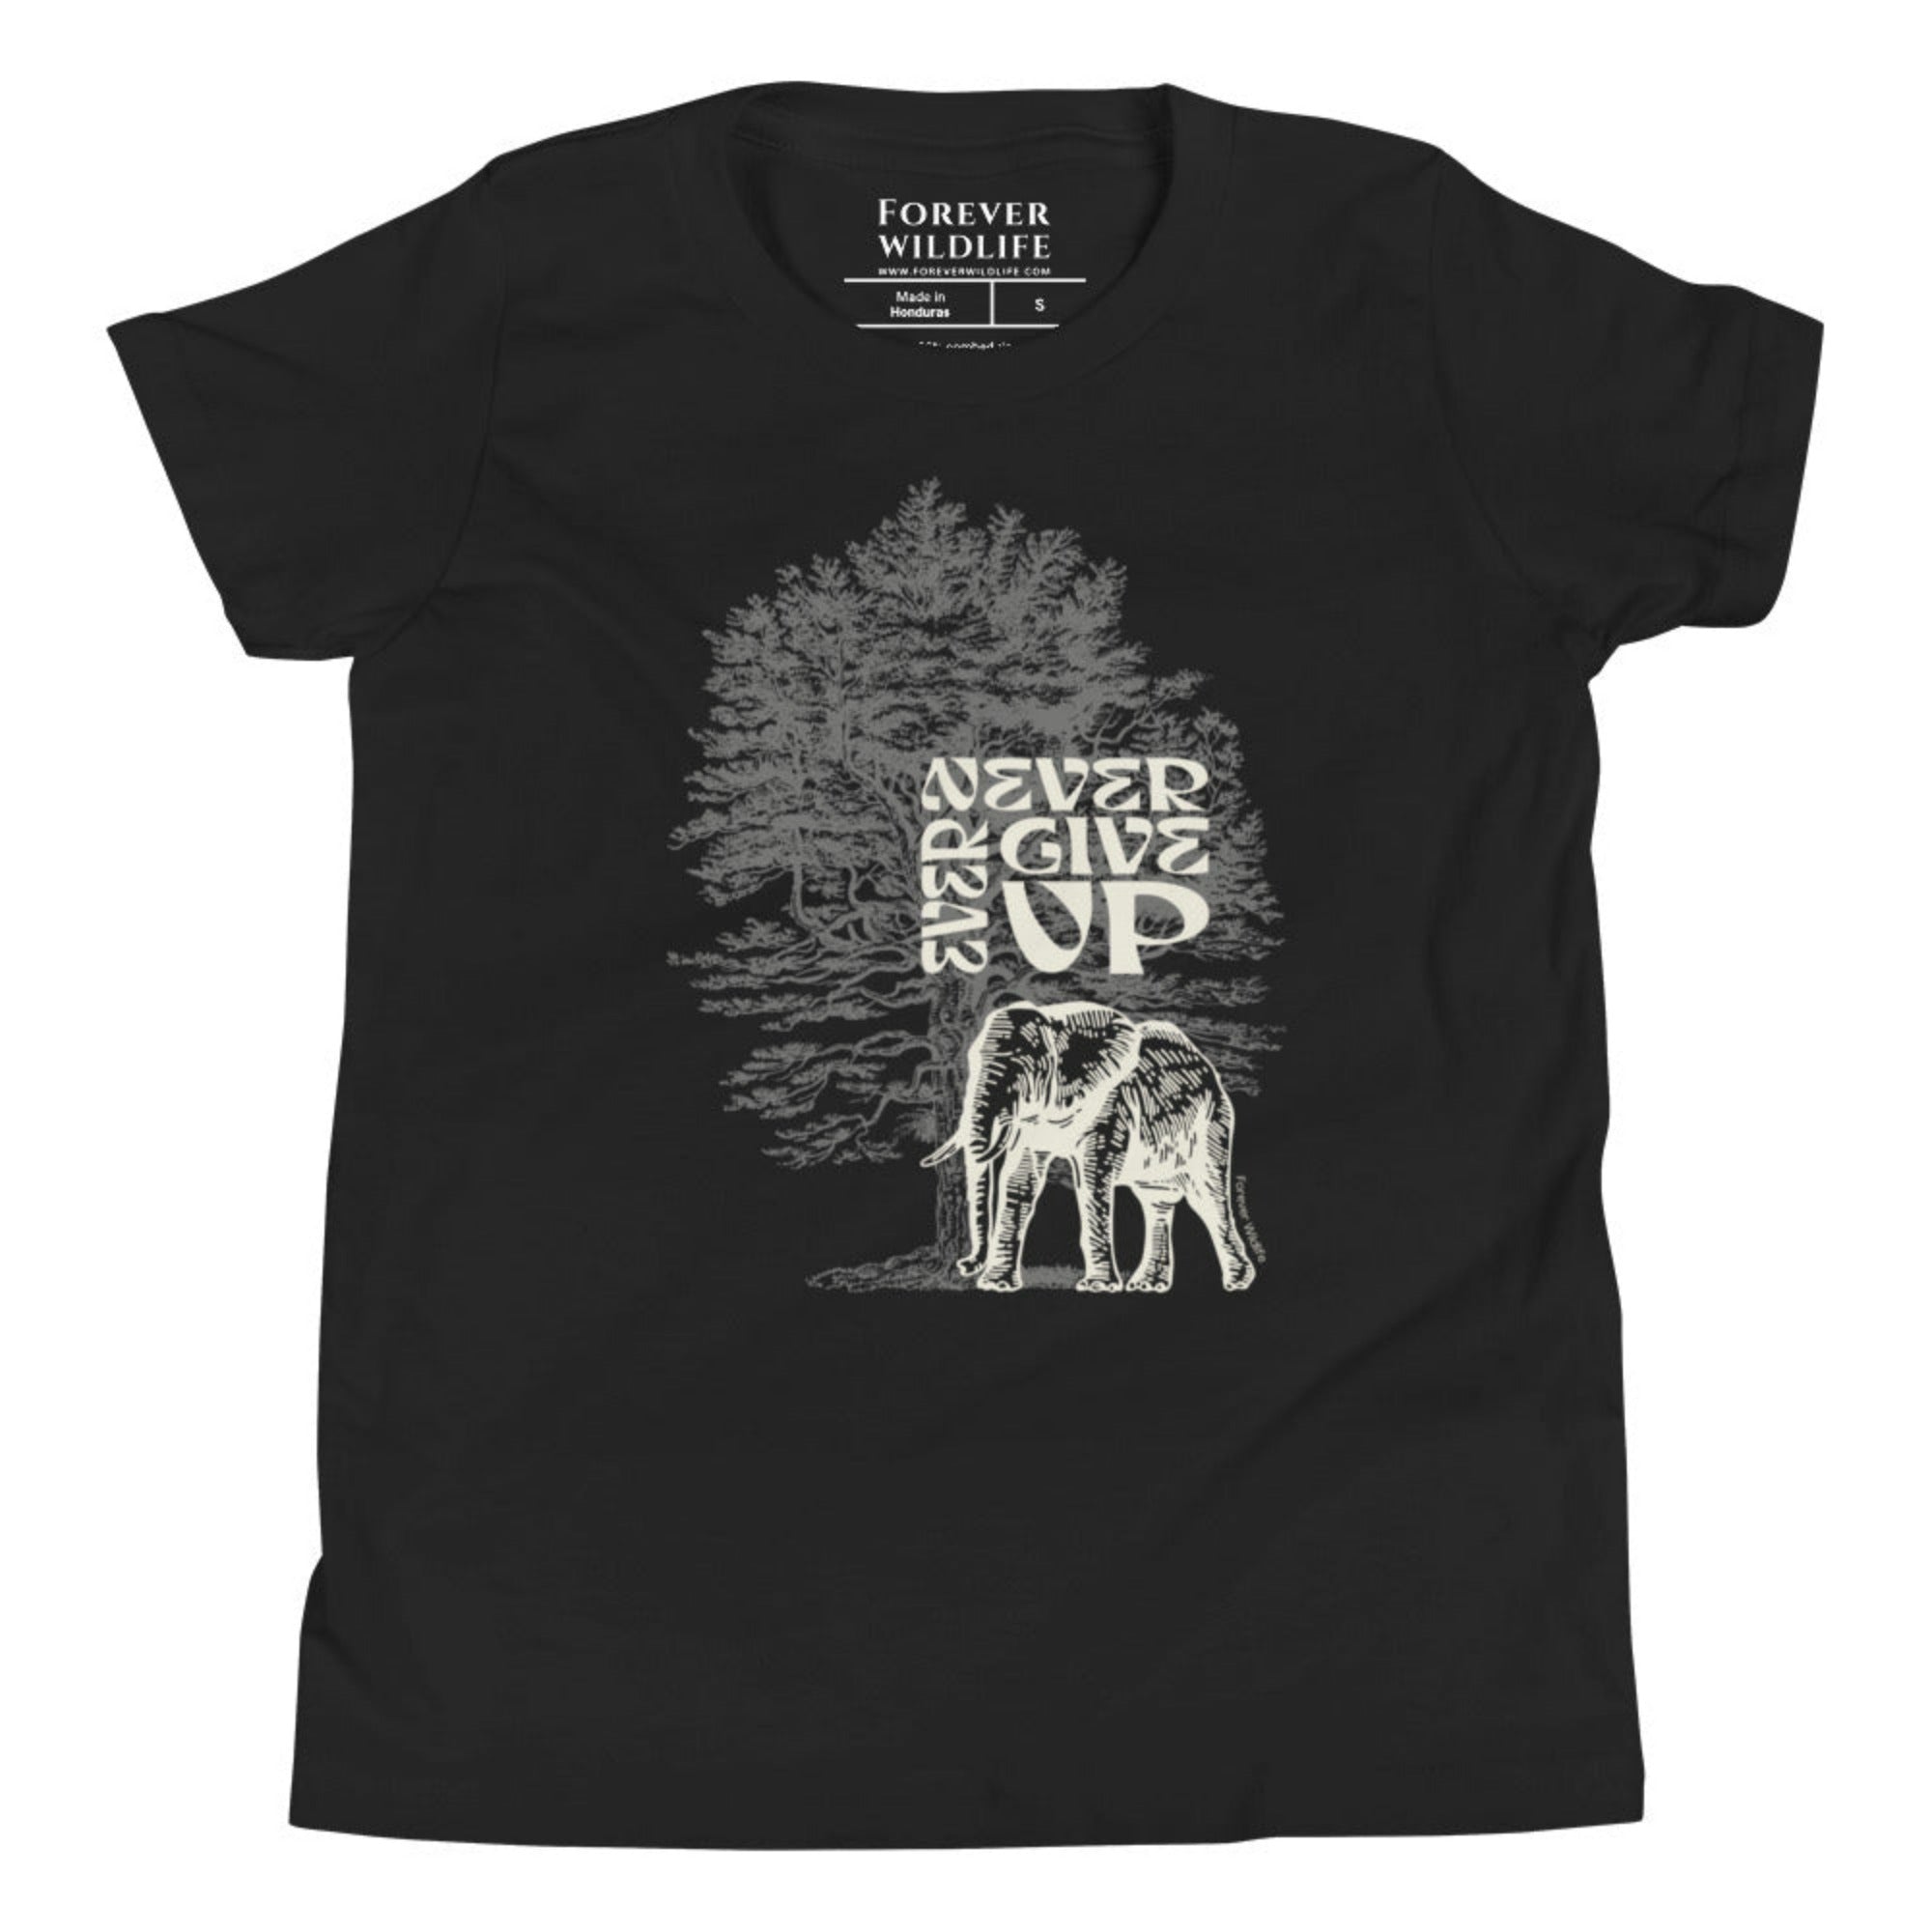 Black Youth T-Shirt with Elephant graphic as part of Wildlife T-Shirts, Wildlife Clothing & Apparel by Forever Wildlife